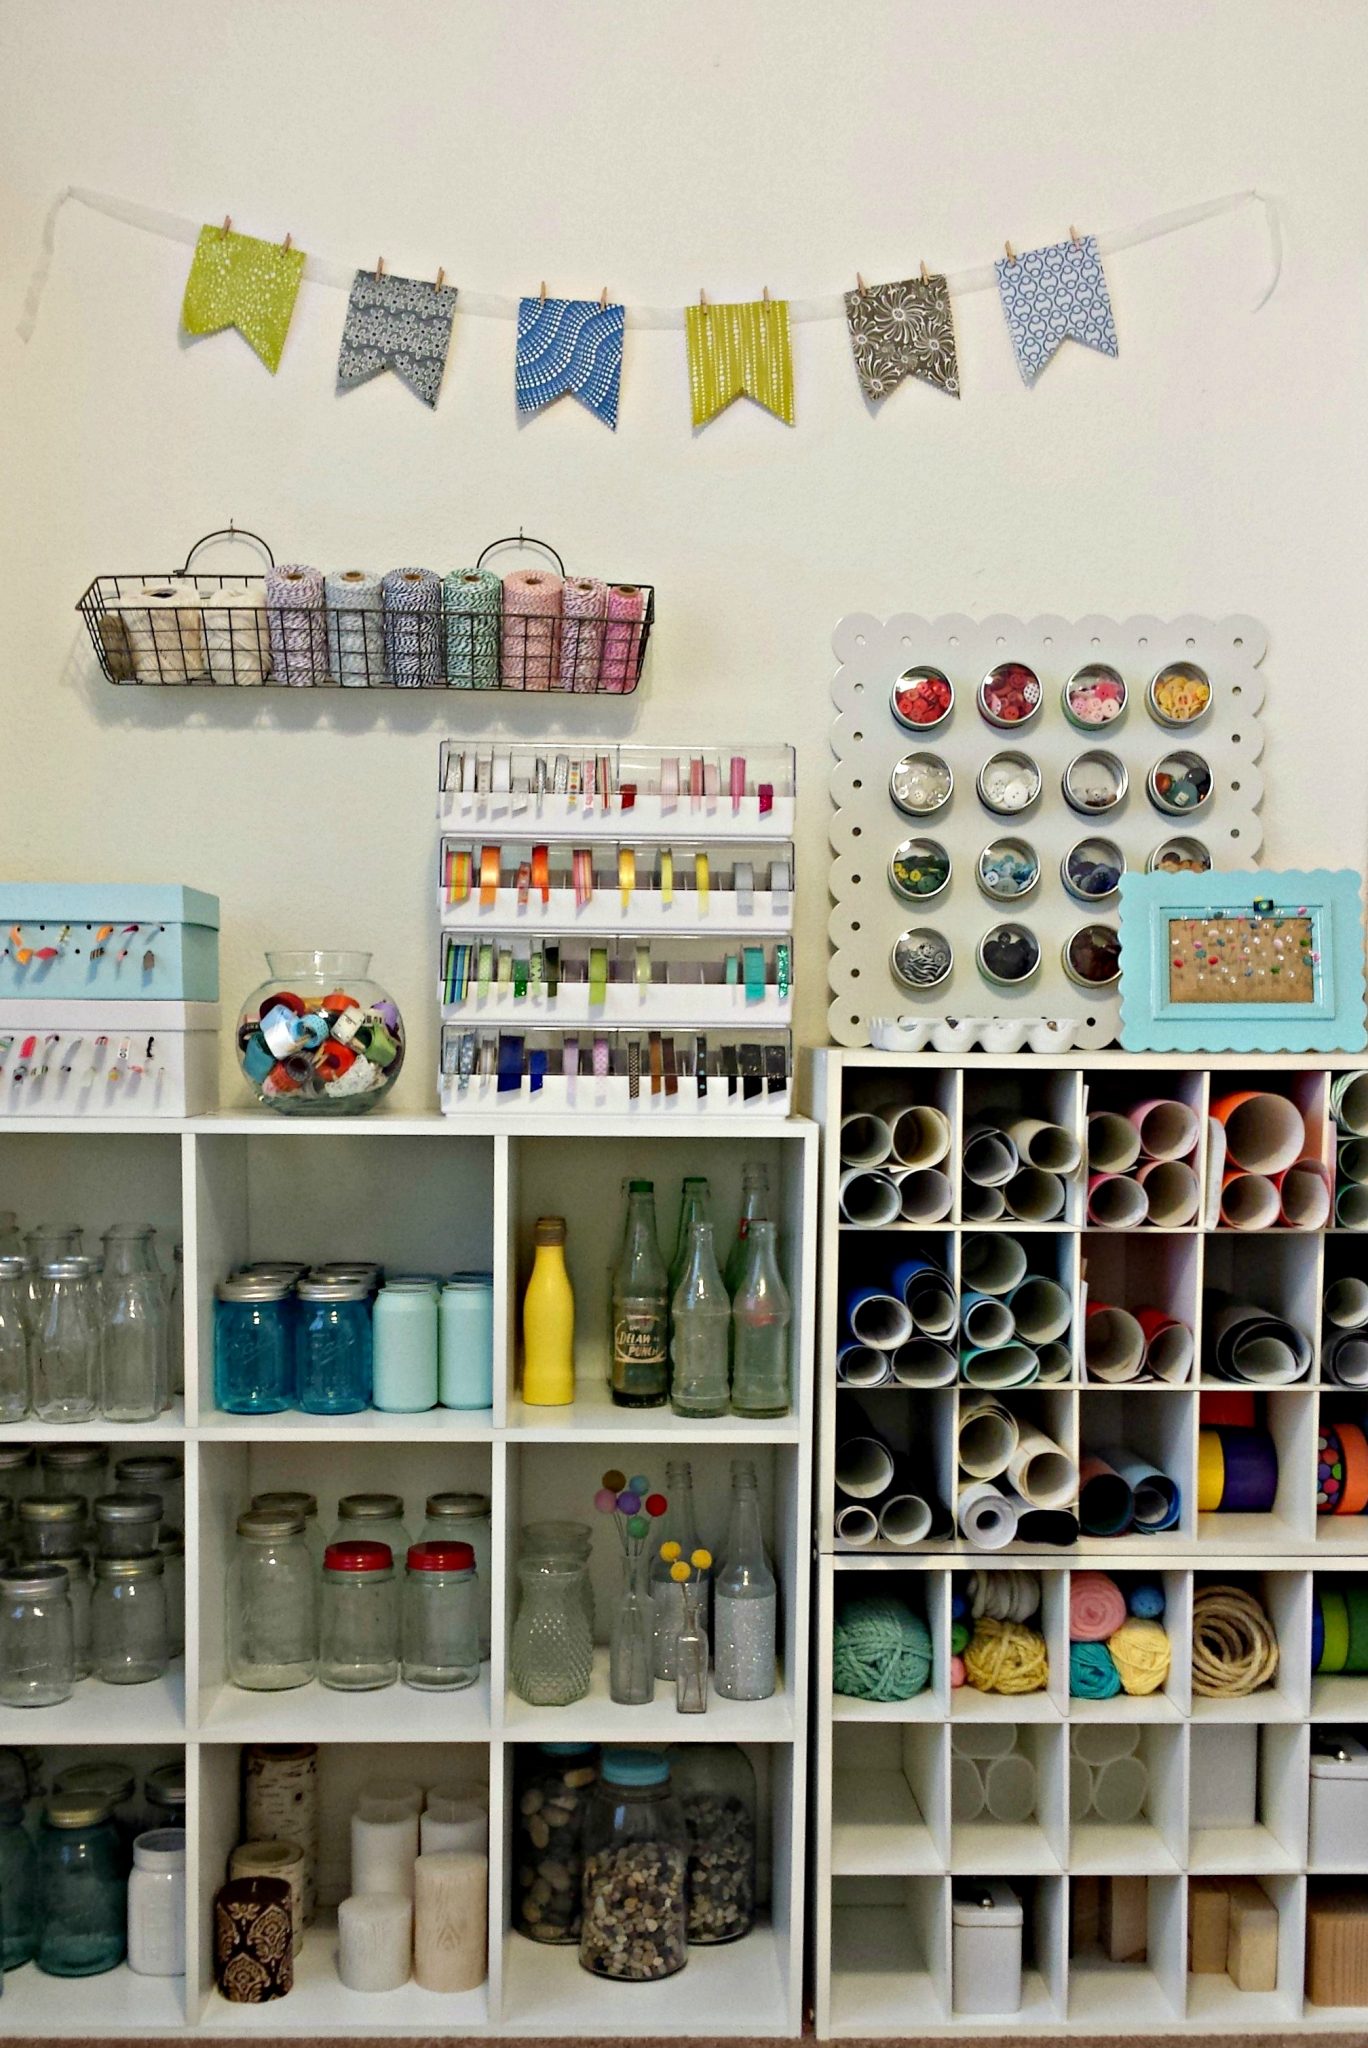 Take tours of over 25 amazing craft room in this series! A great way to get inspired for your own craft room!